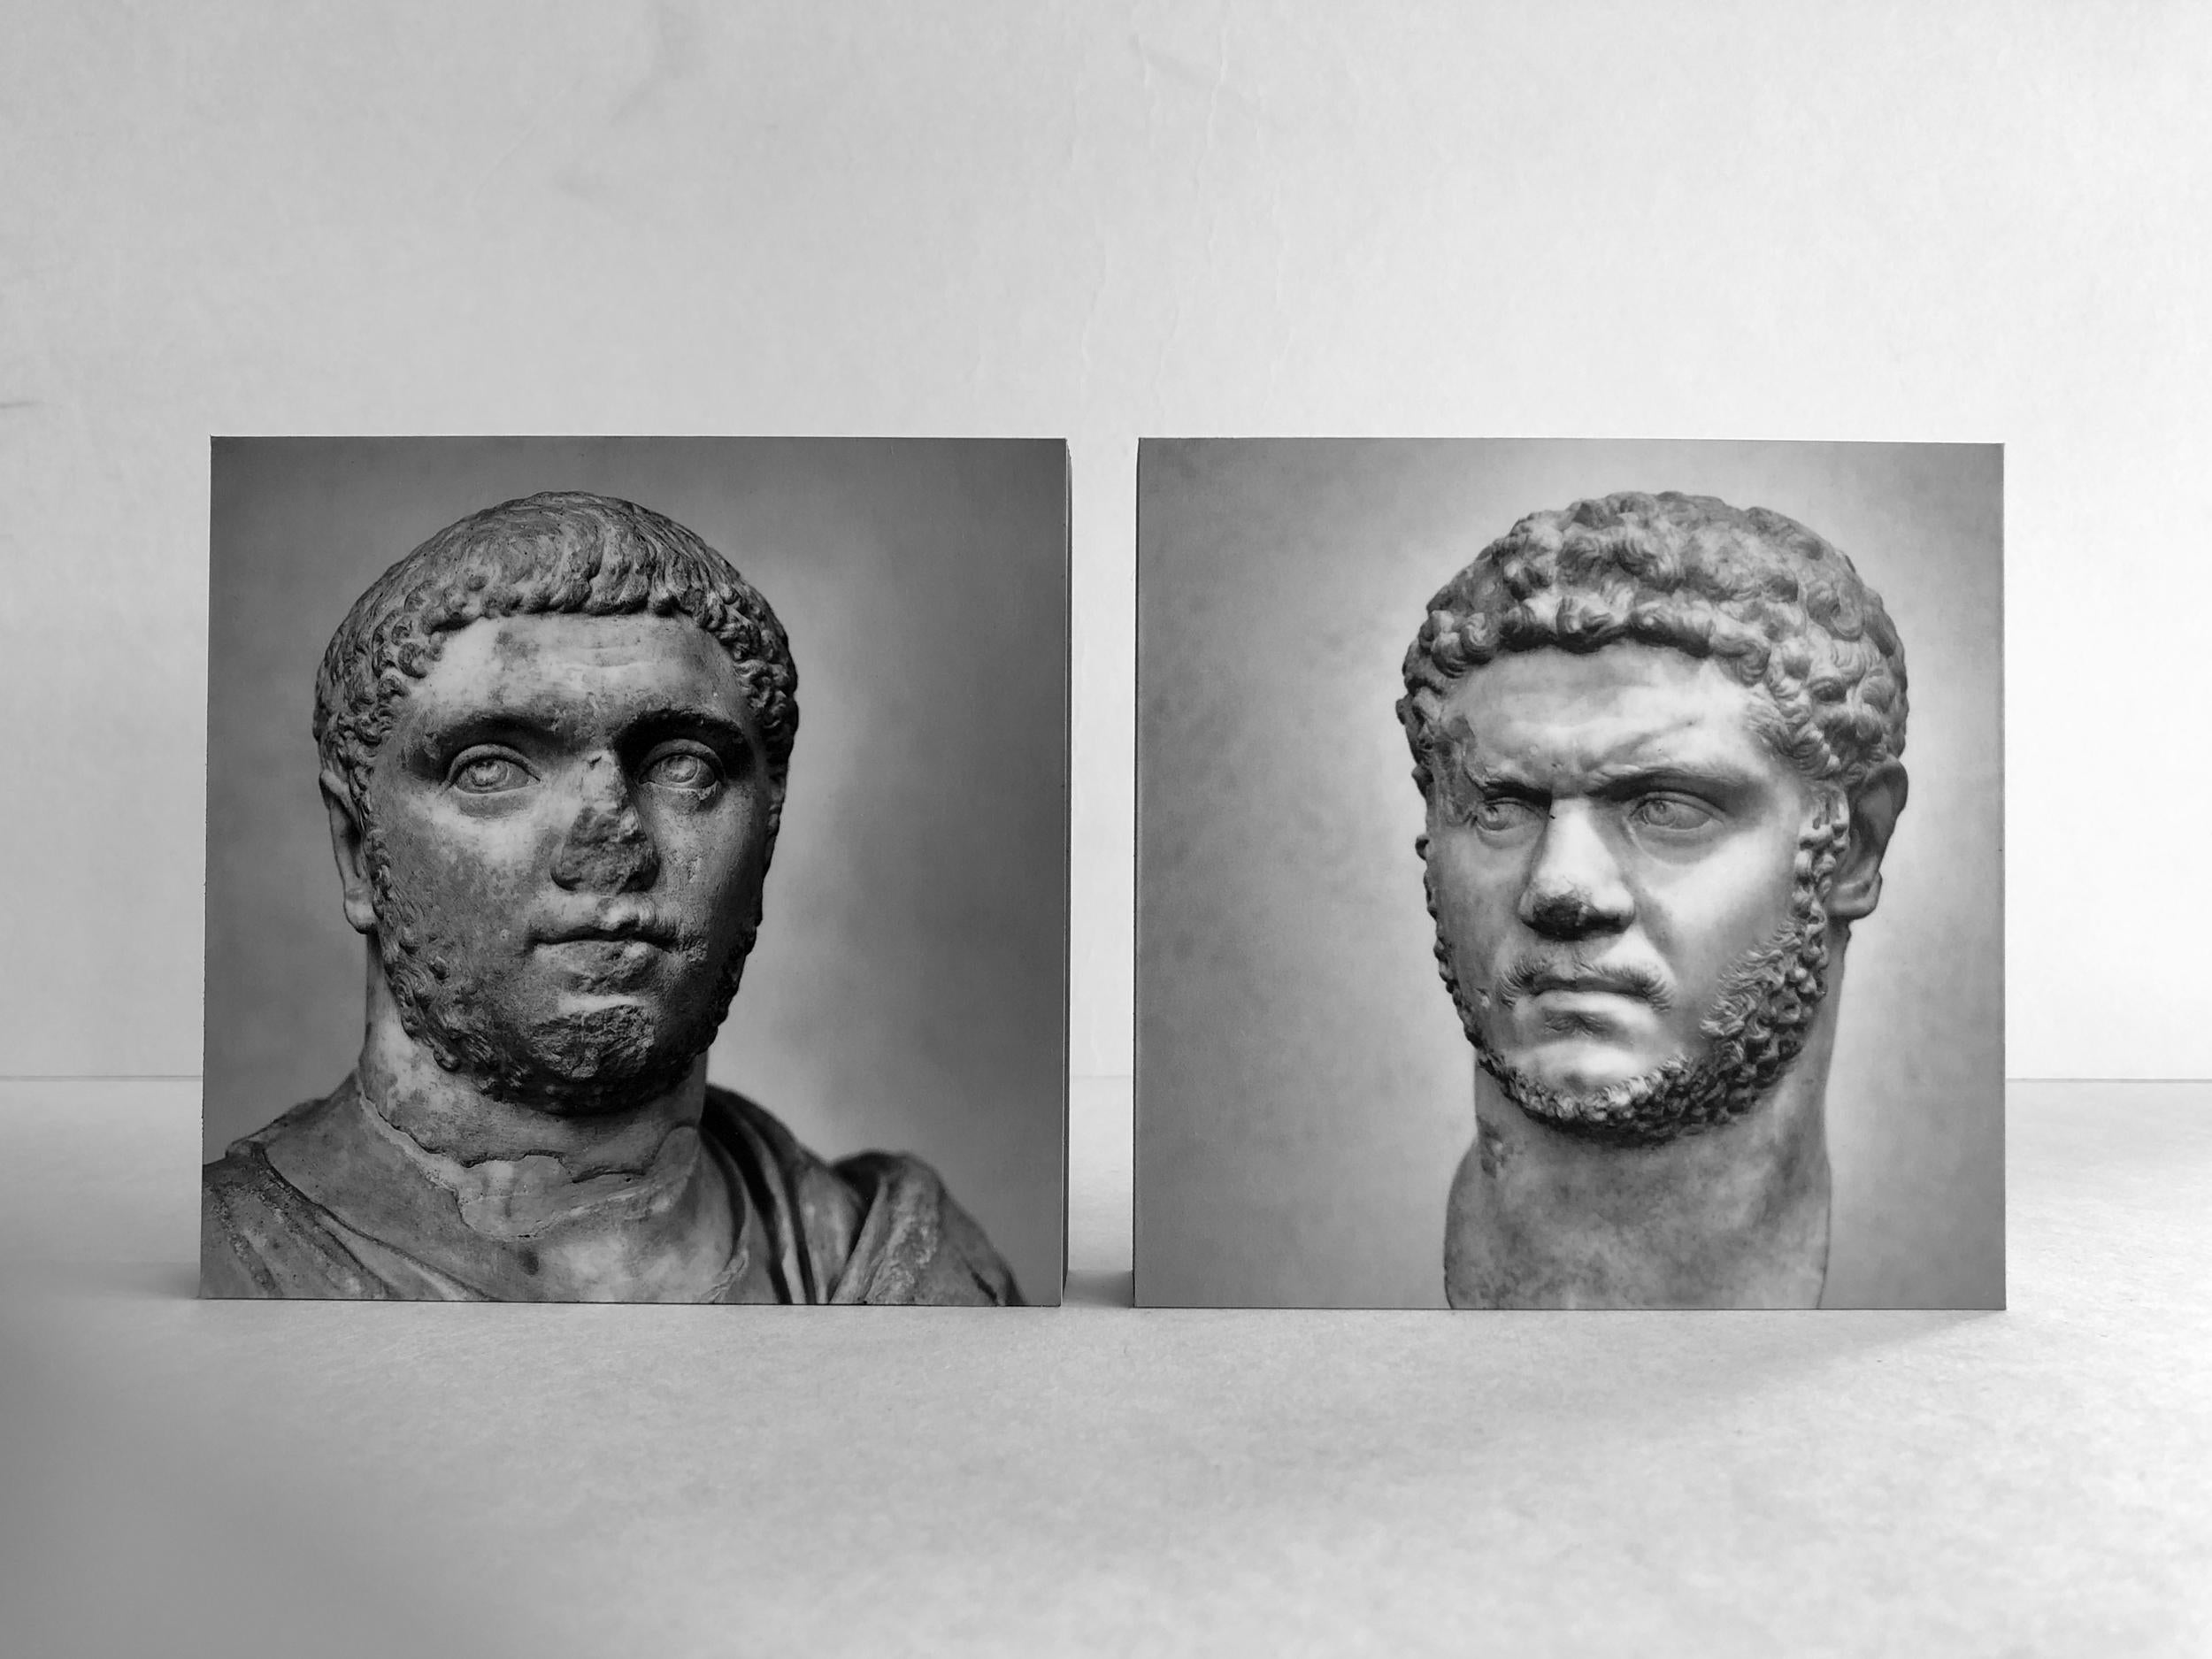 IMPERATORUM - Geta & Caracalla - brothers against - diptych #03 - #04 - collection: "Romae" - Alberto Desirò

Two brothers against, one accustomed to sovereign arrogance, the other kind, understanding, cultured and prone to a life dedicated to the